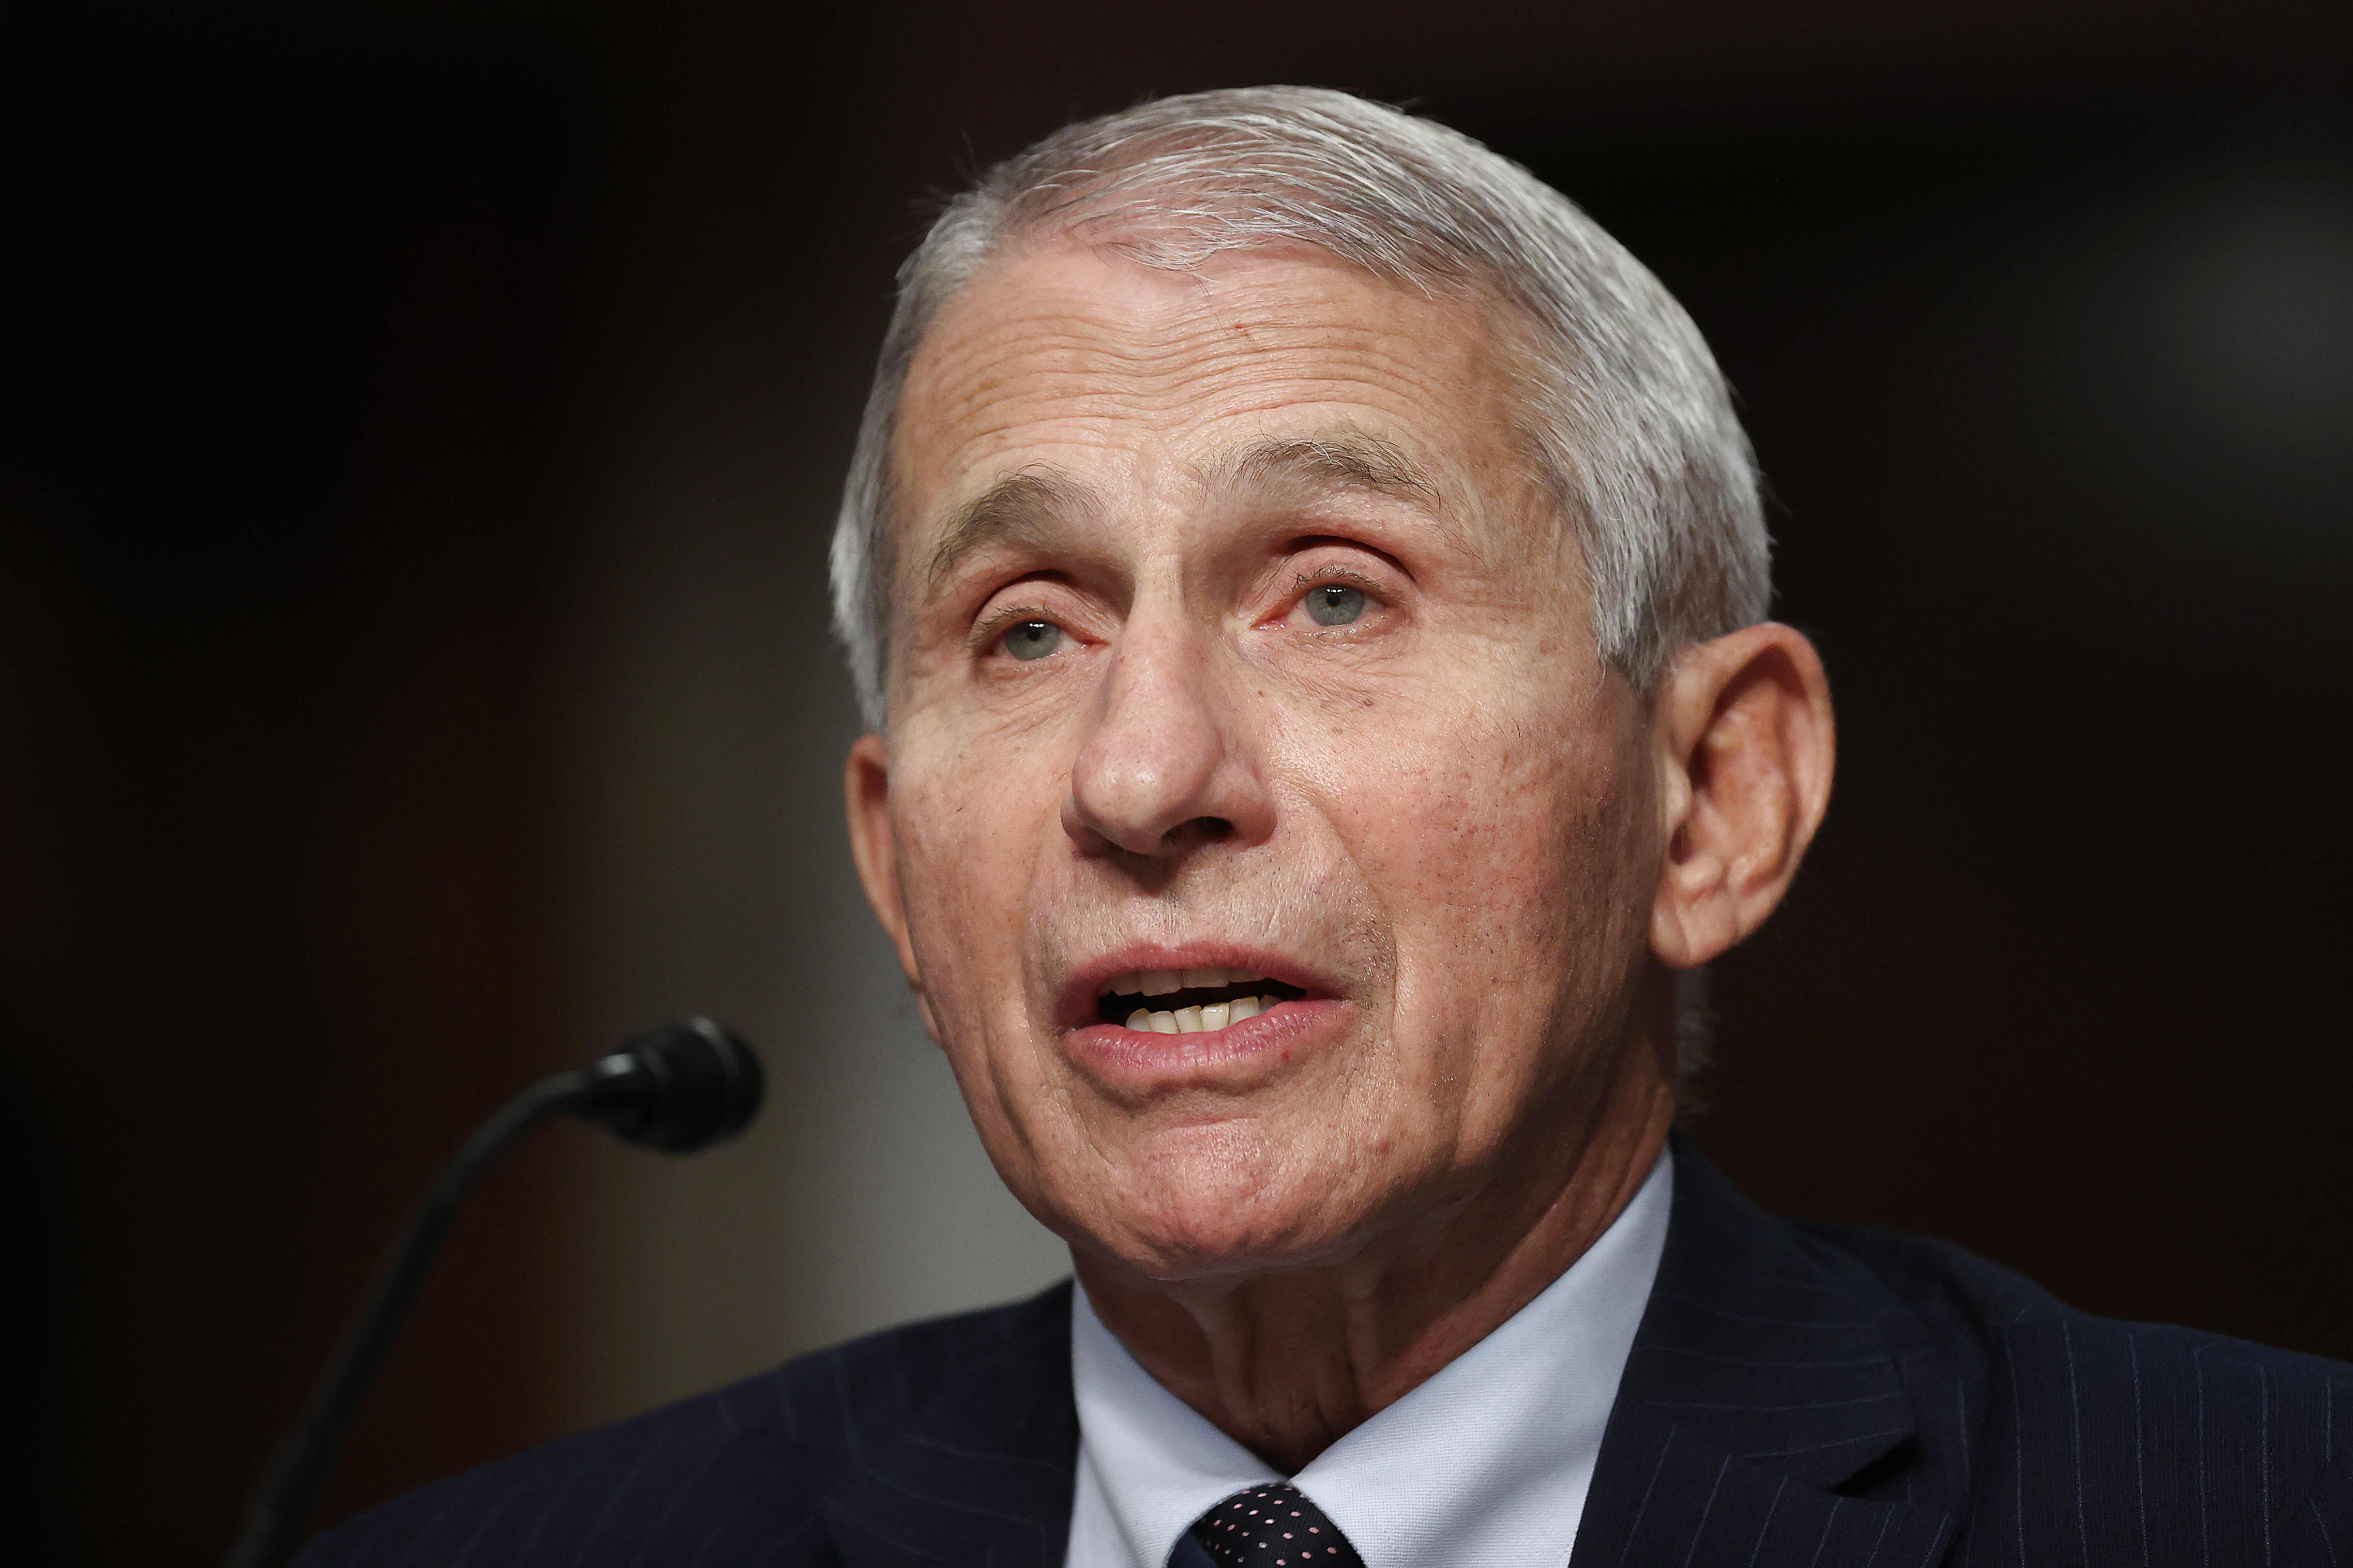 Dr. Fauci: CDC reducing Covid isolation time guidelines will ‘get people back to jobs’